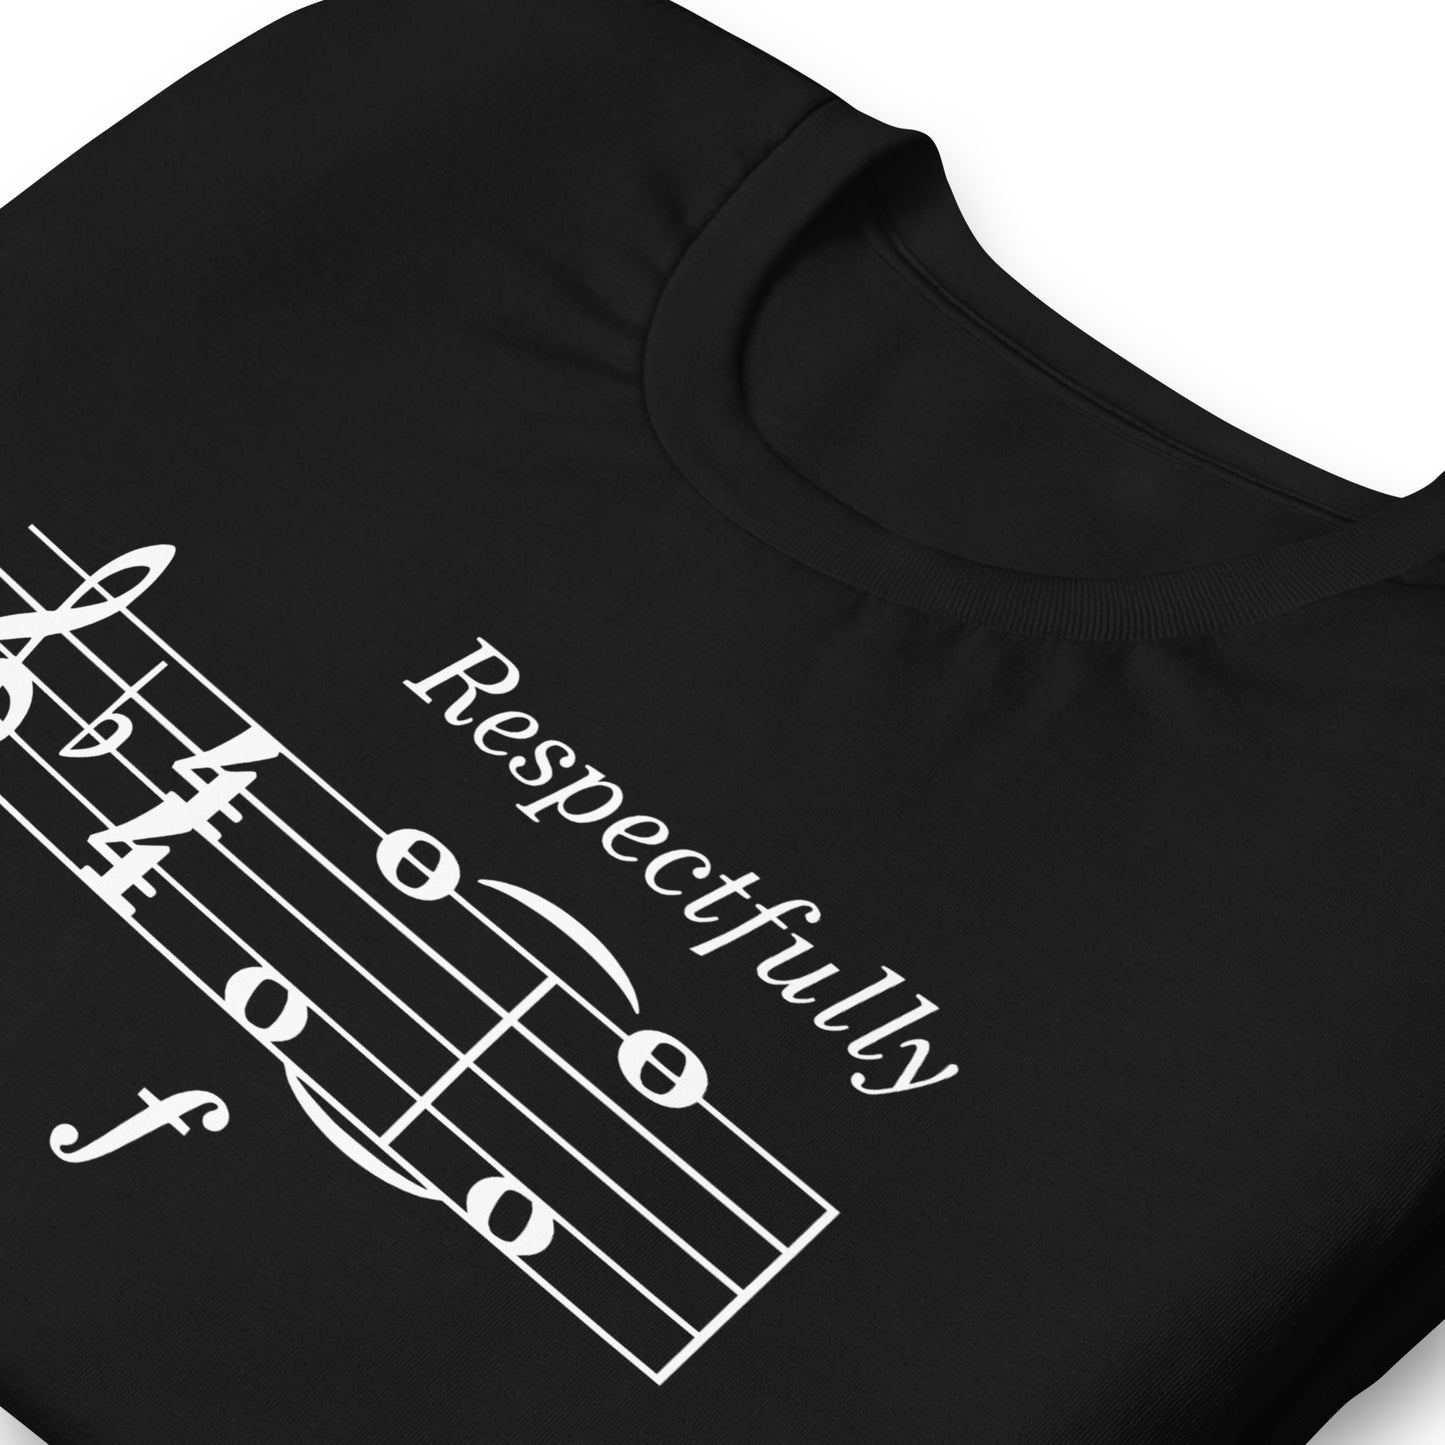 Funny Music Theory Video Game Meme T Shirt: Play F to Pay Respect - Black